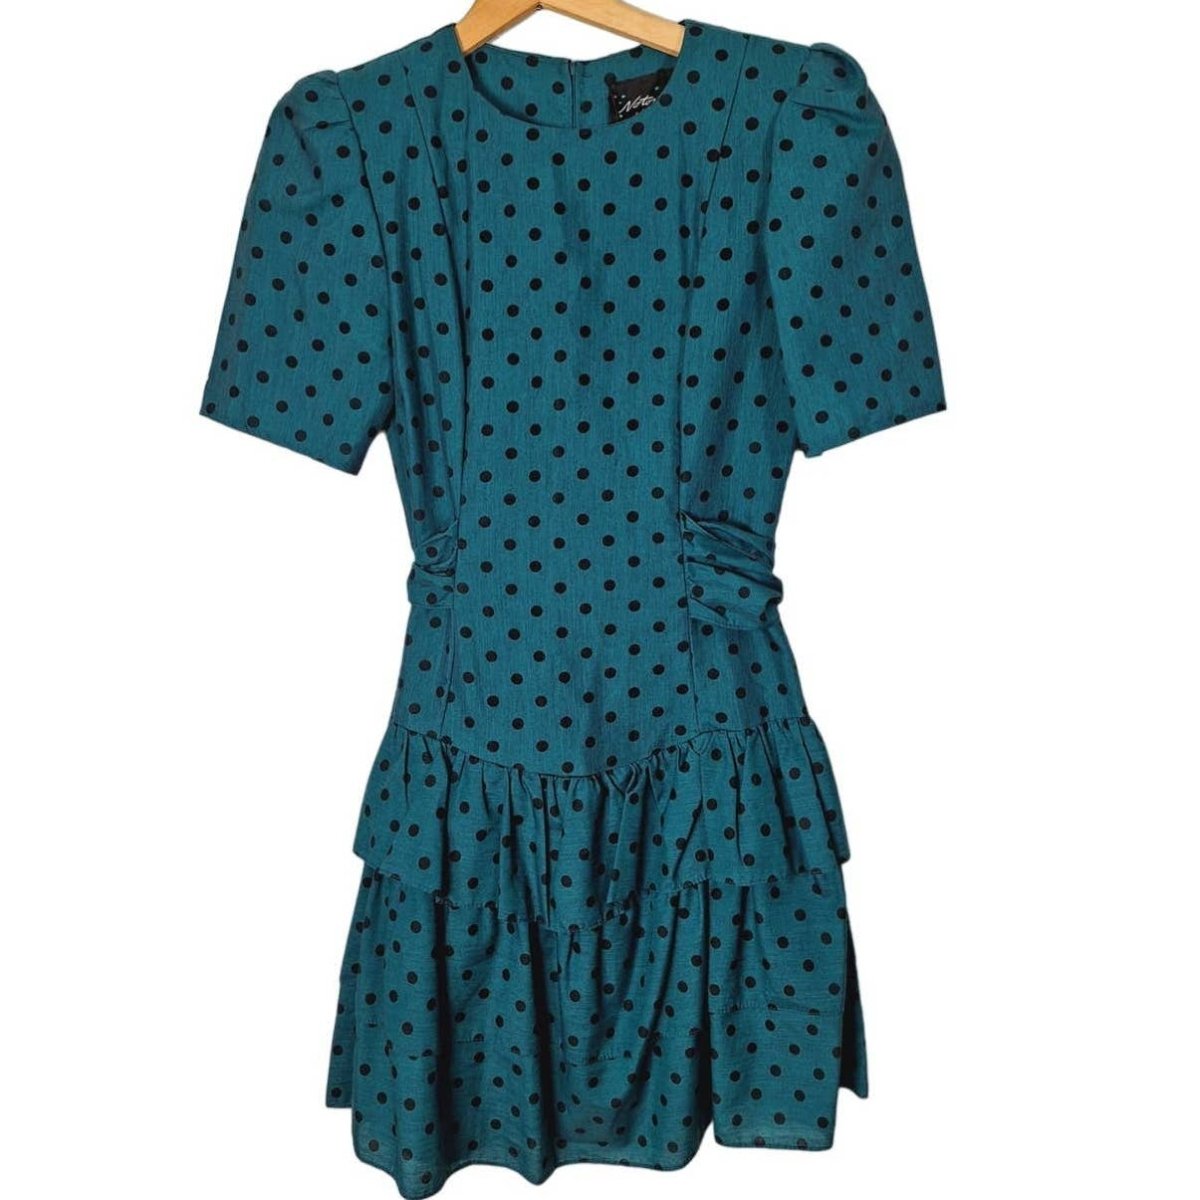 80s Teal/Black Polka Dot Ruffled Drop Waist Party Dress Size 7 Small - themallvintage The Mall Vintage